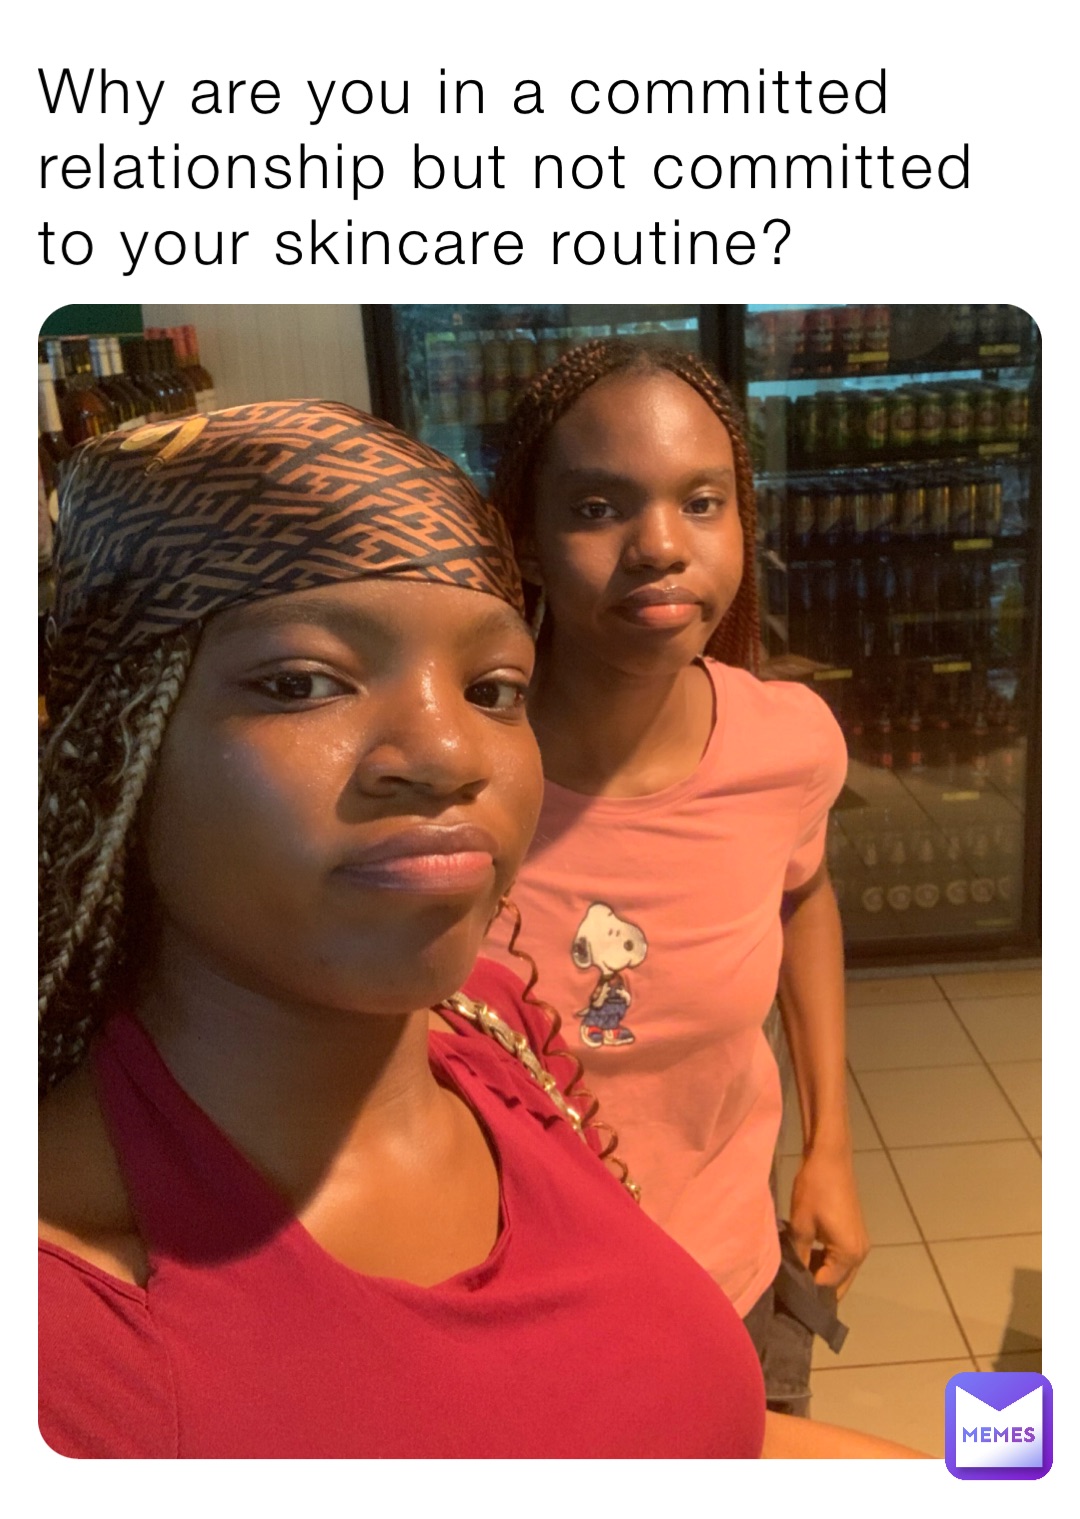 Why are you in a committed relationship but not committed to your skincare routine?